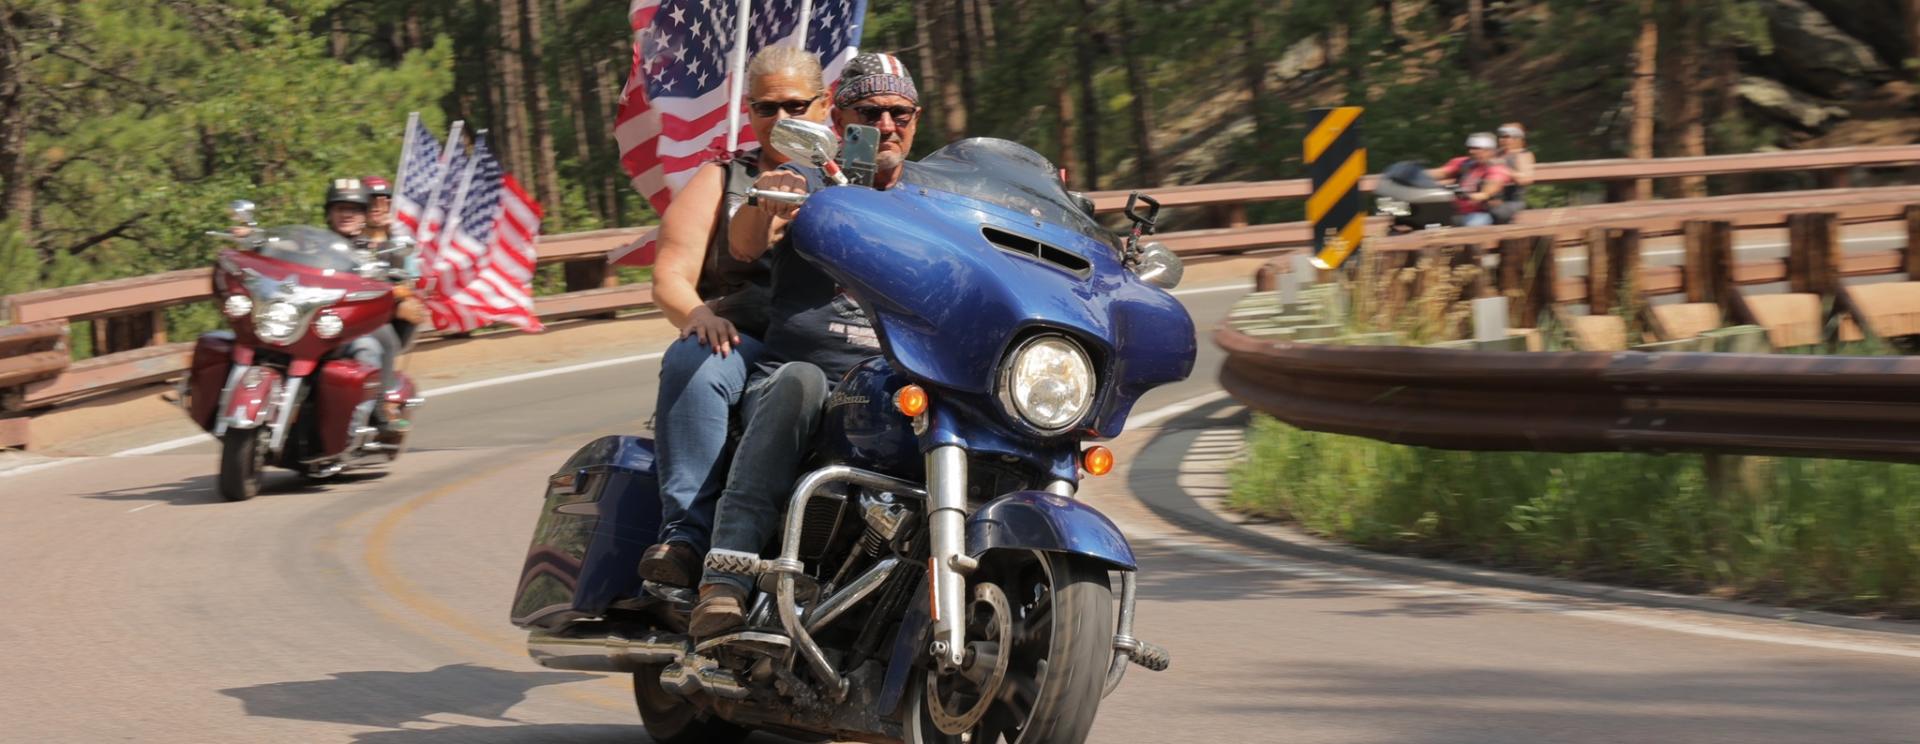 84th Sturgis Motorcycle Rally